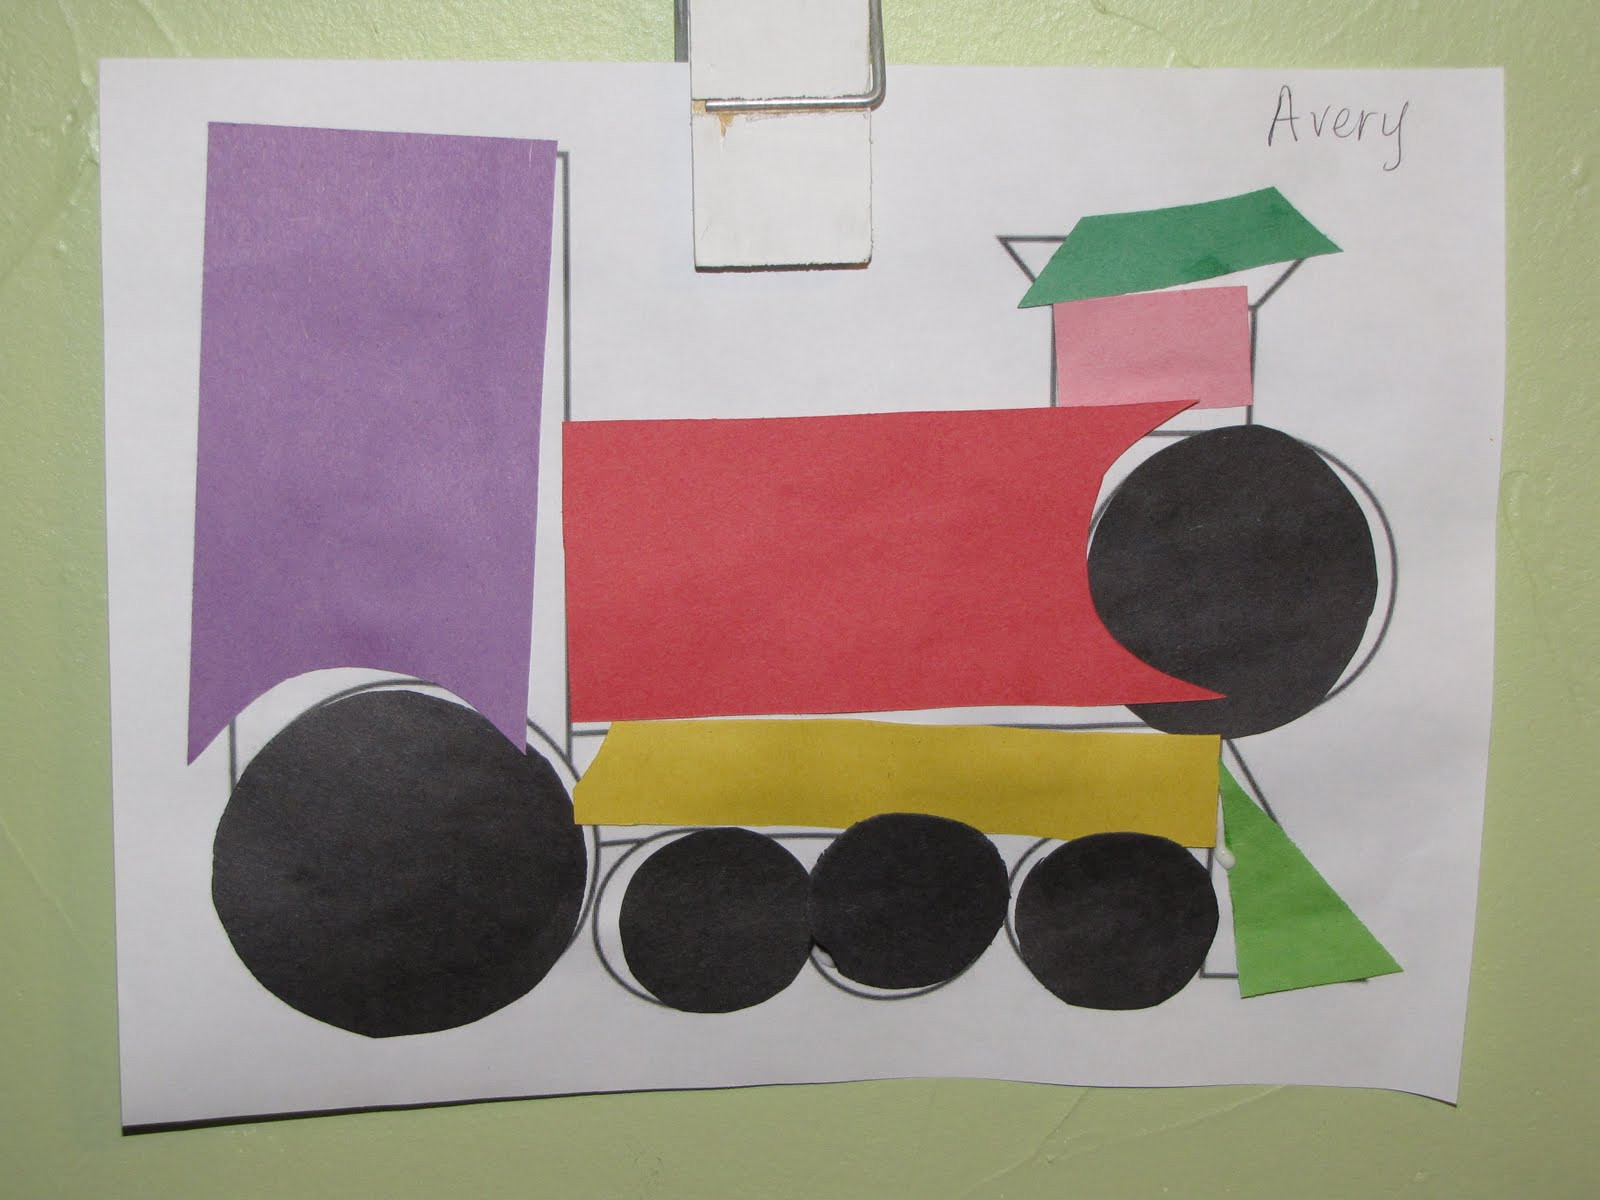 Train Craft For Kids
 Frogs to Fairy Dust Childcare ALL ABOARD THE PRESCHOOL TRAIN